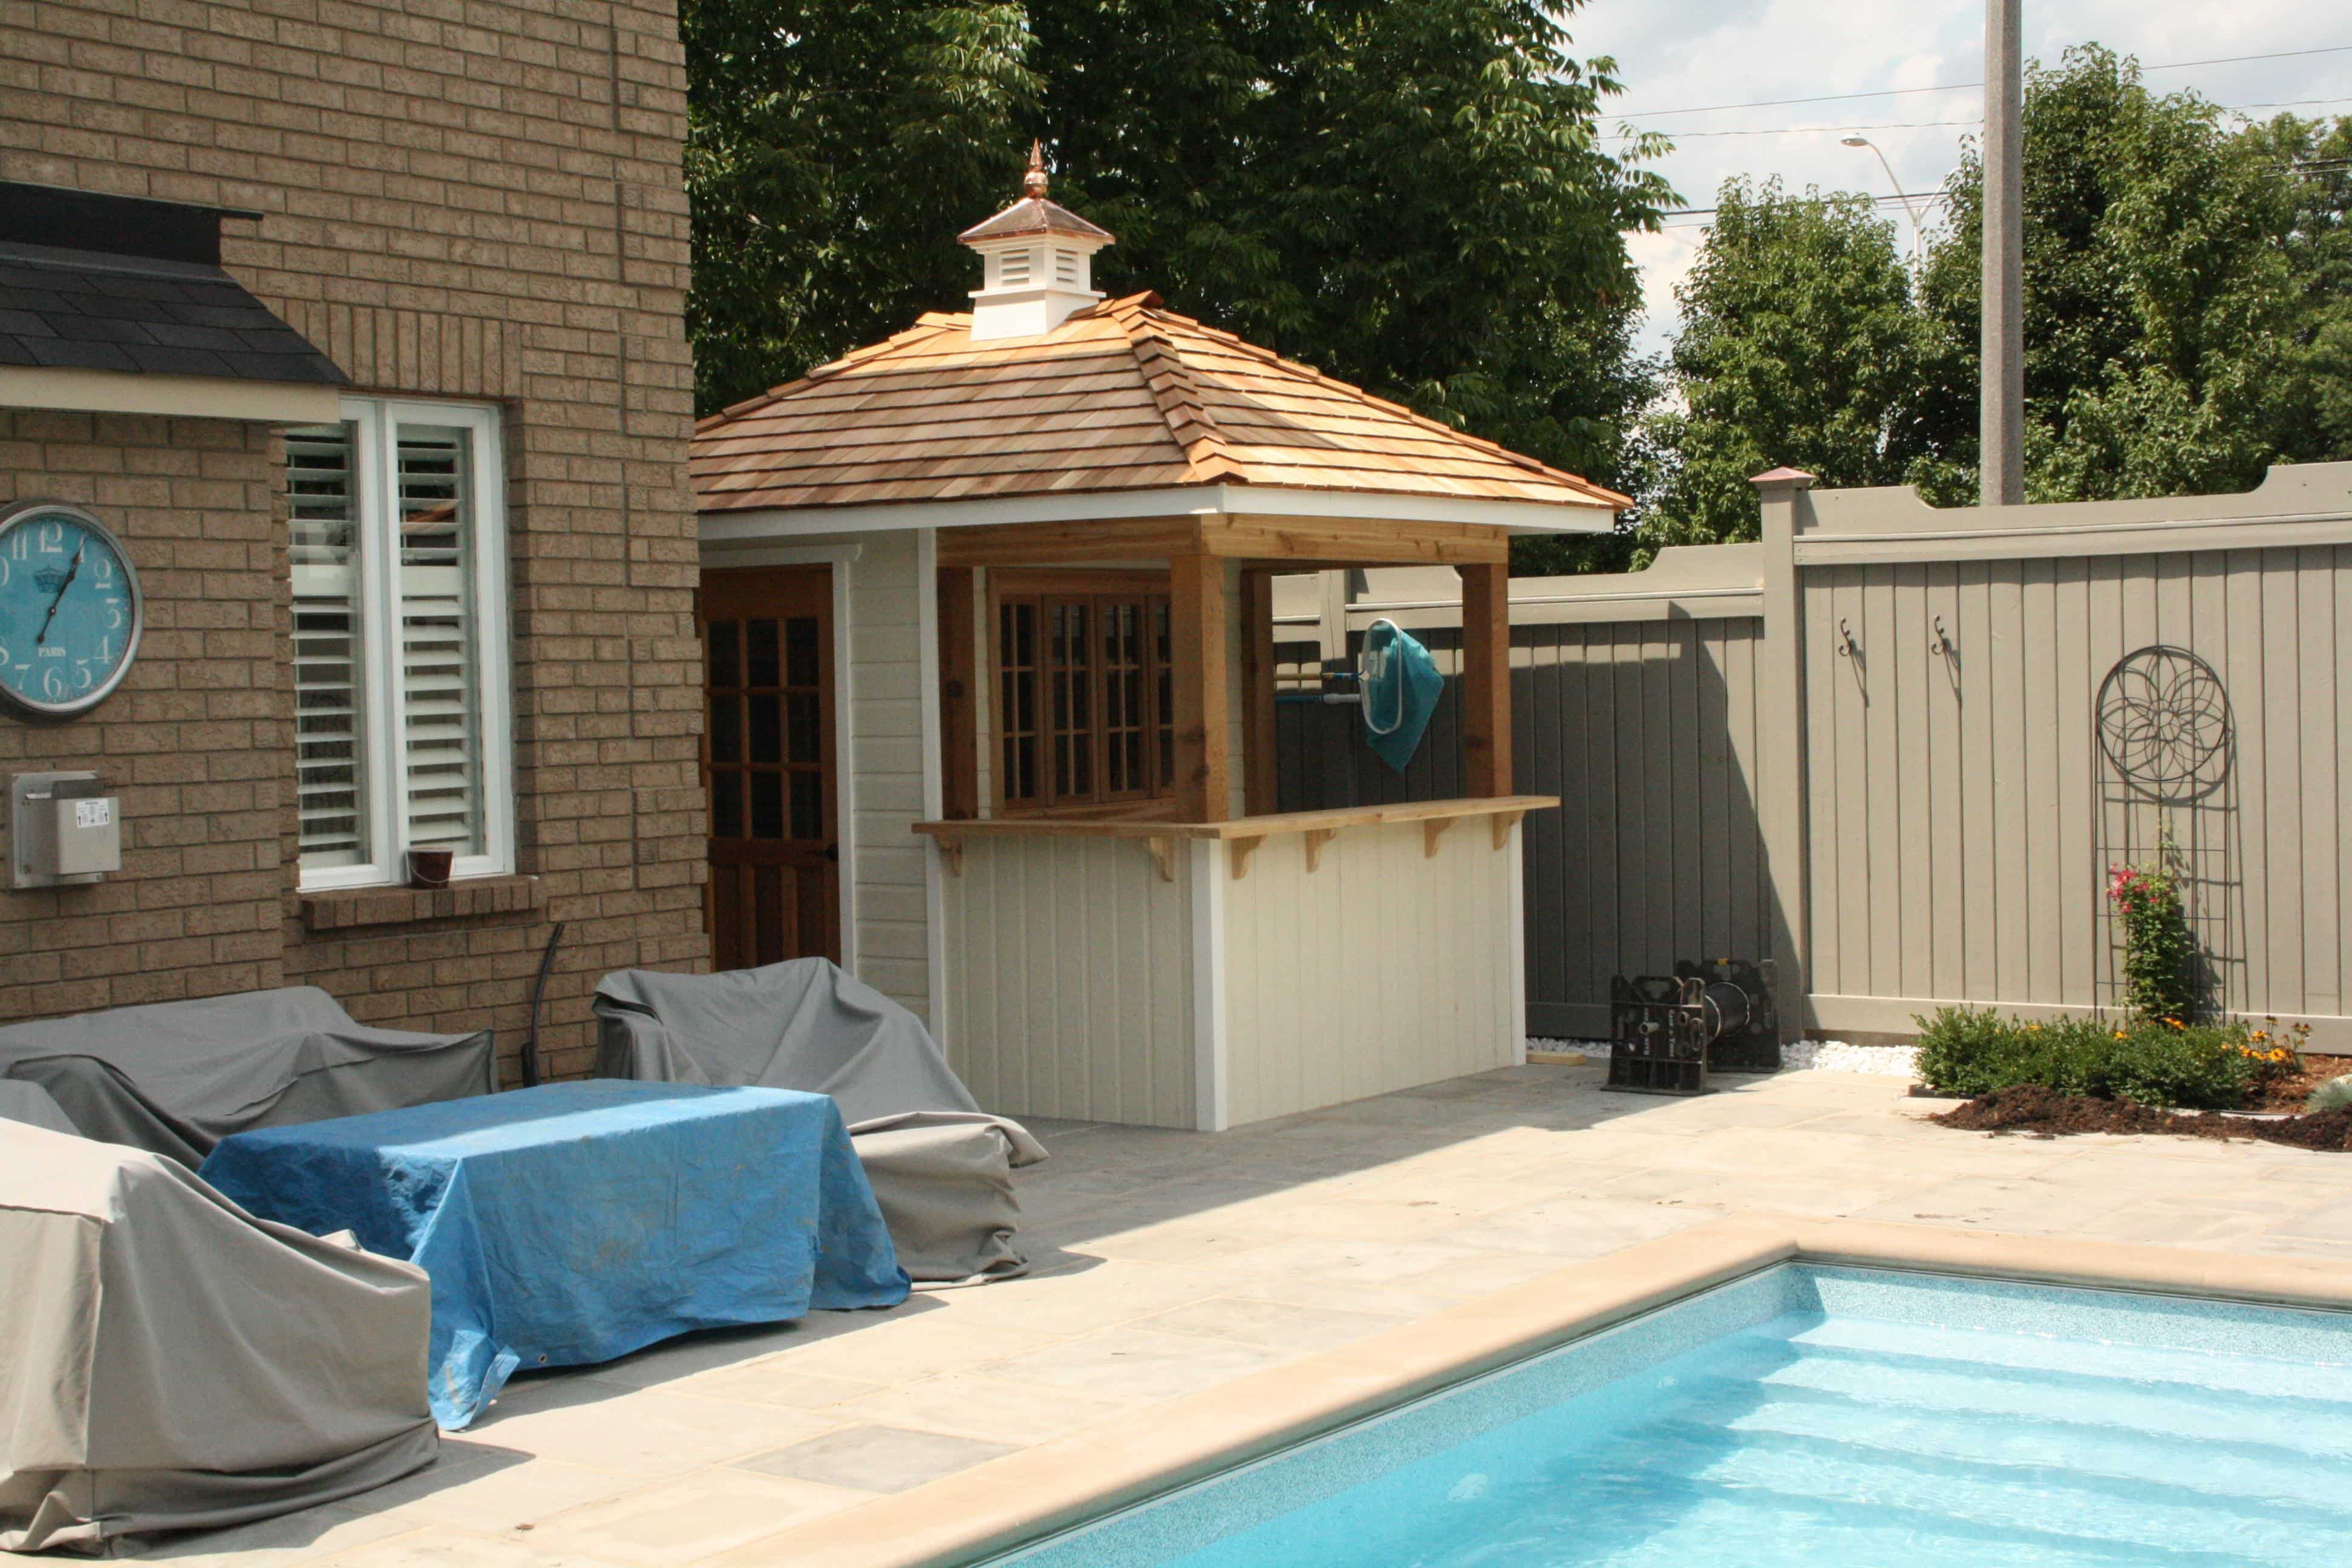 Canexel surfside 7X12 pool cabana kit in Houston Texas. ID number 151920-1.